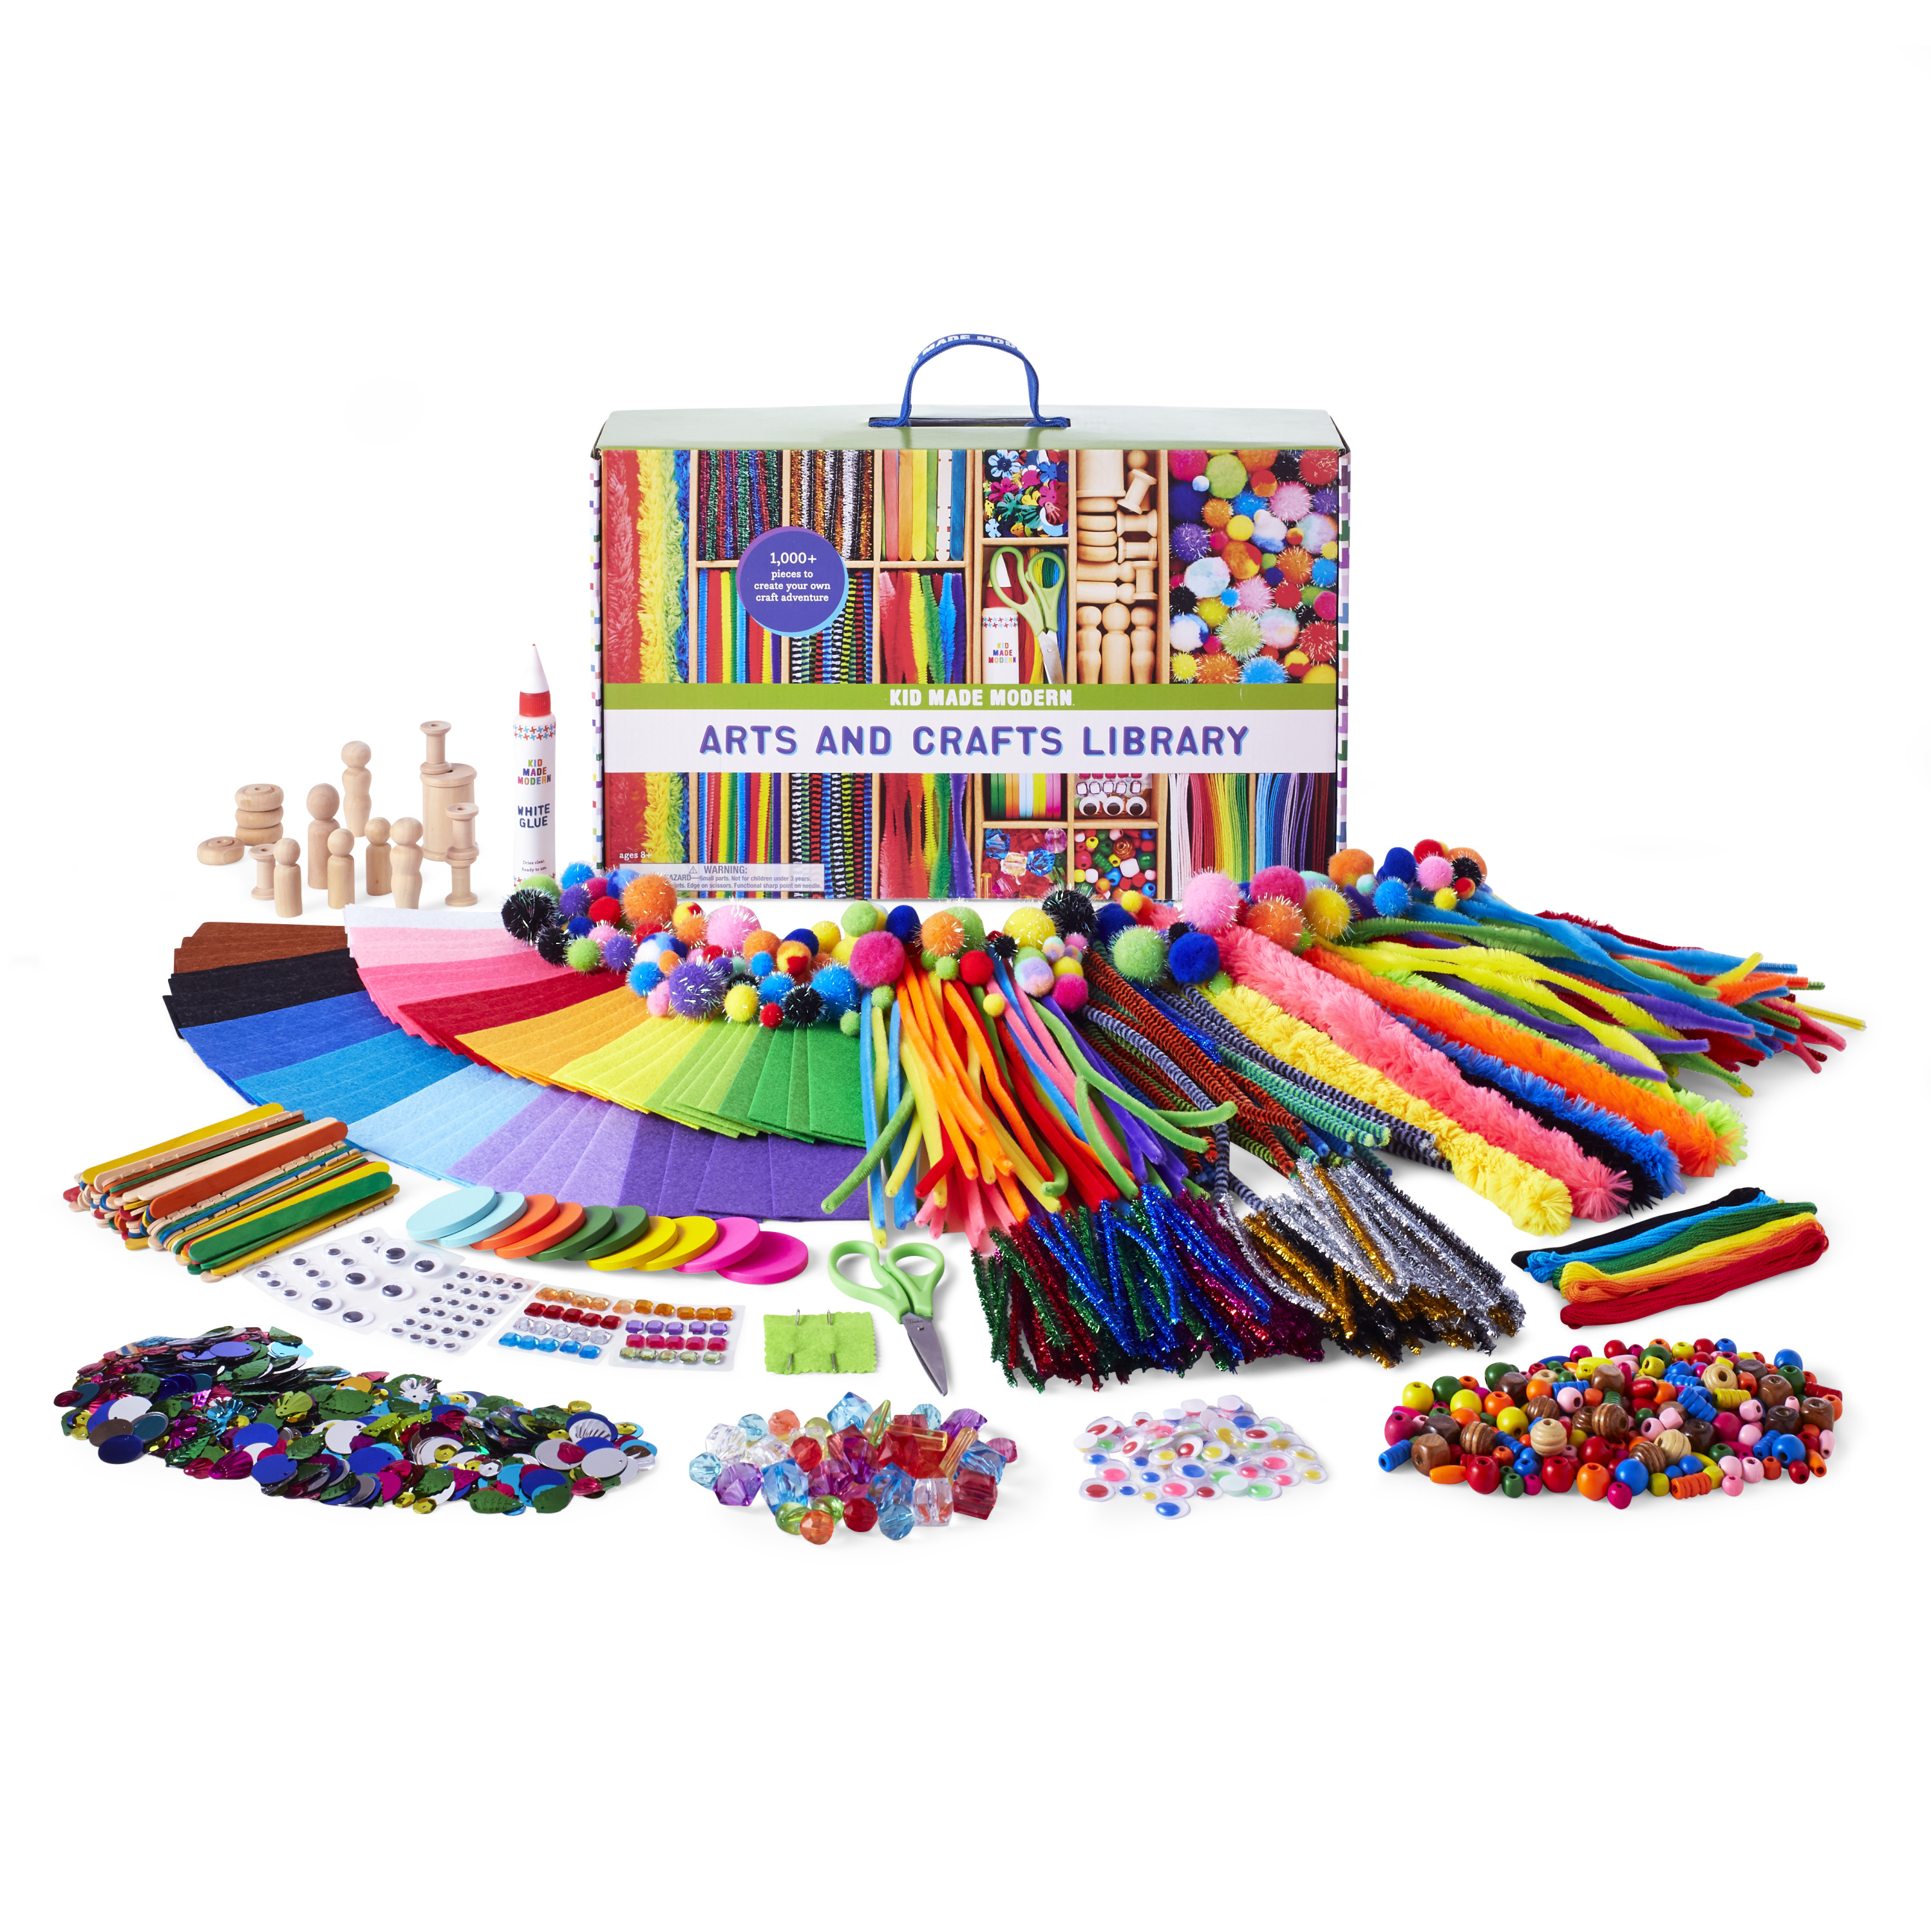 Kid Made Modern Arts and Crafts Library - Craft Set for Kids Ages 6 and Up - image 2 of 5